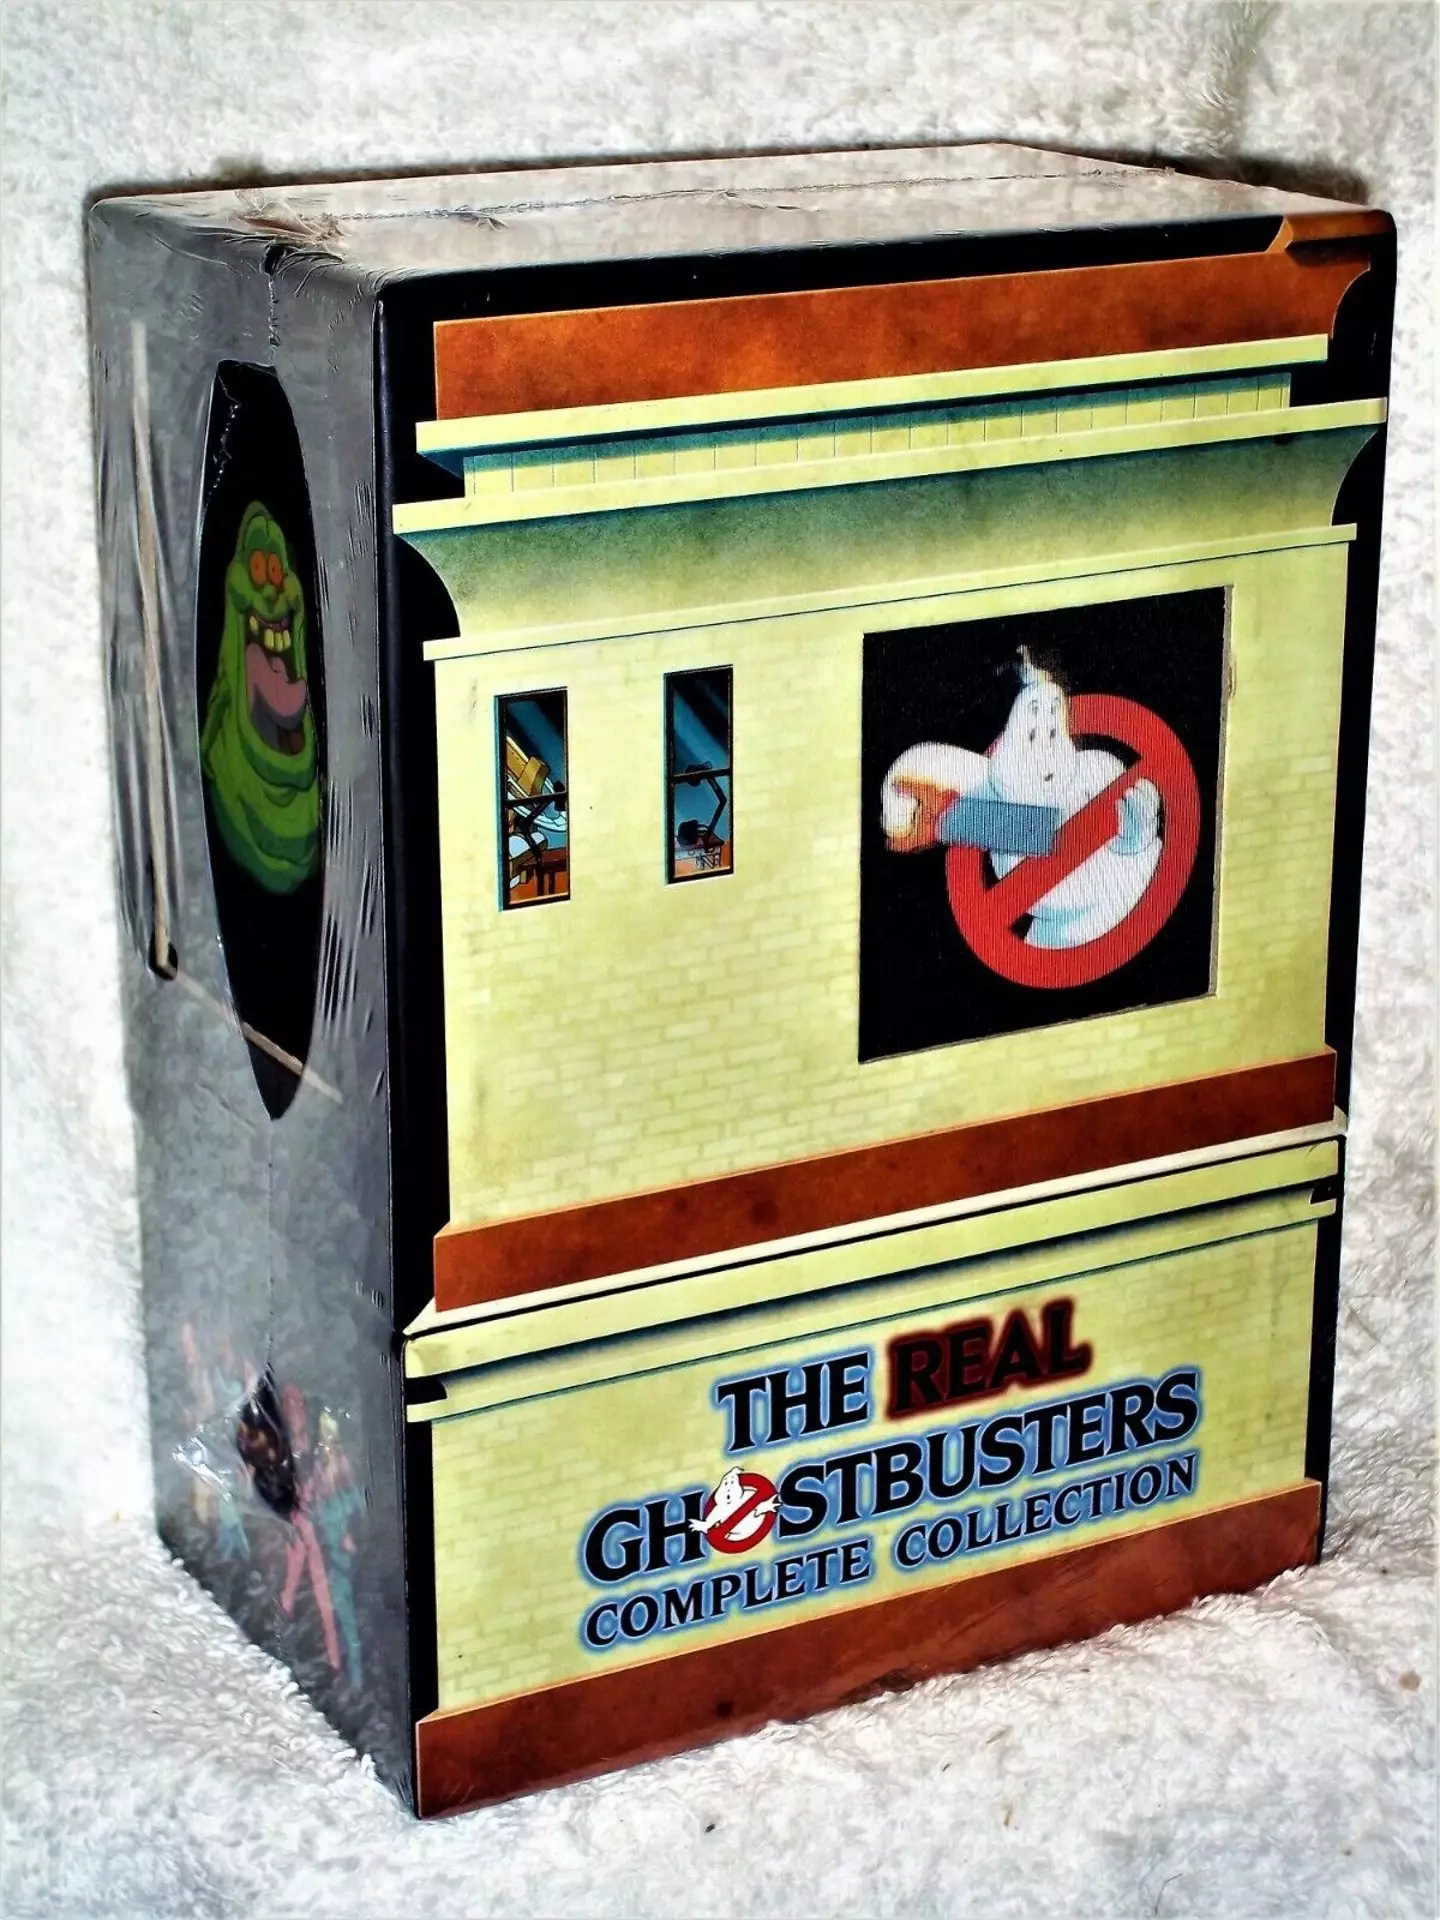 The Real Ghostbusters complete collection.